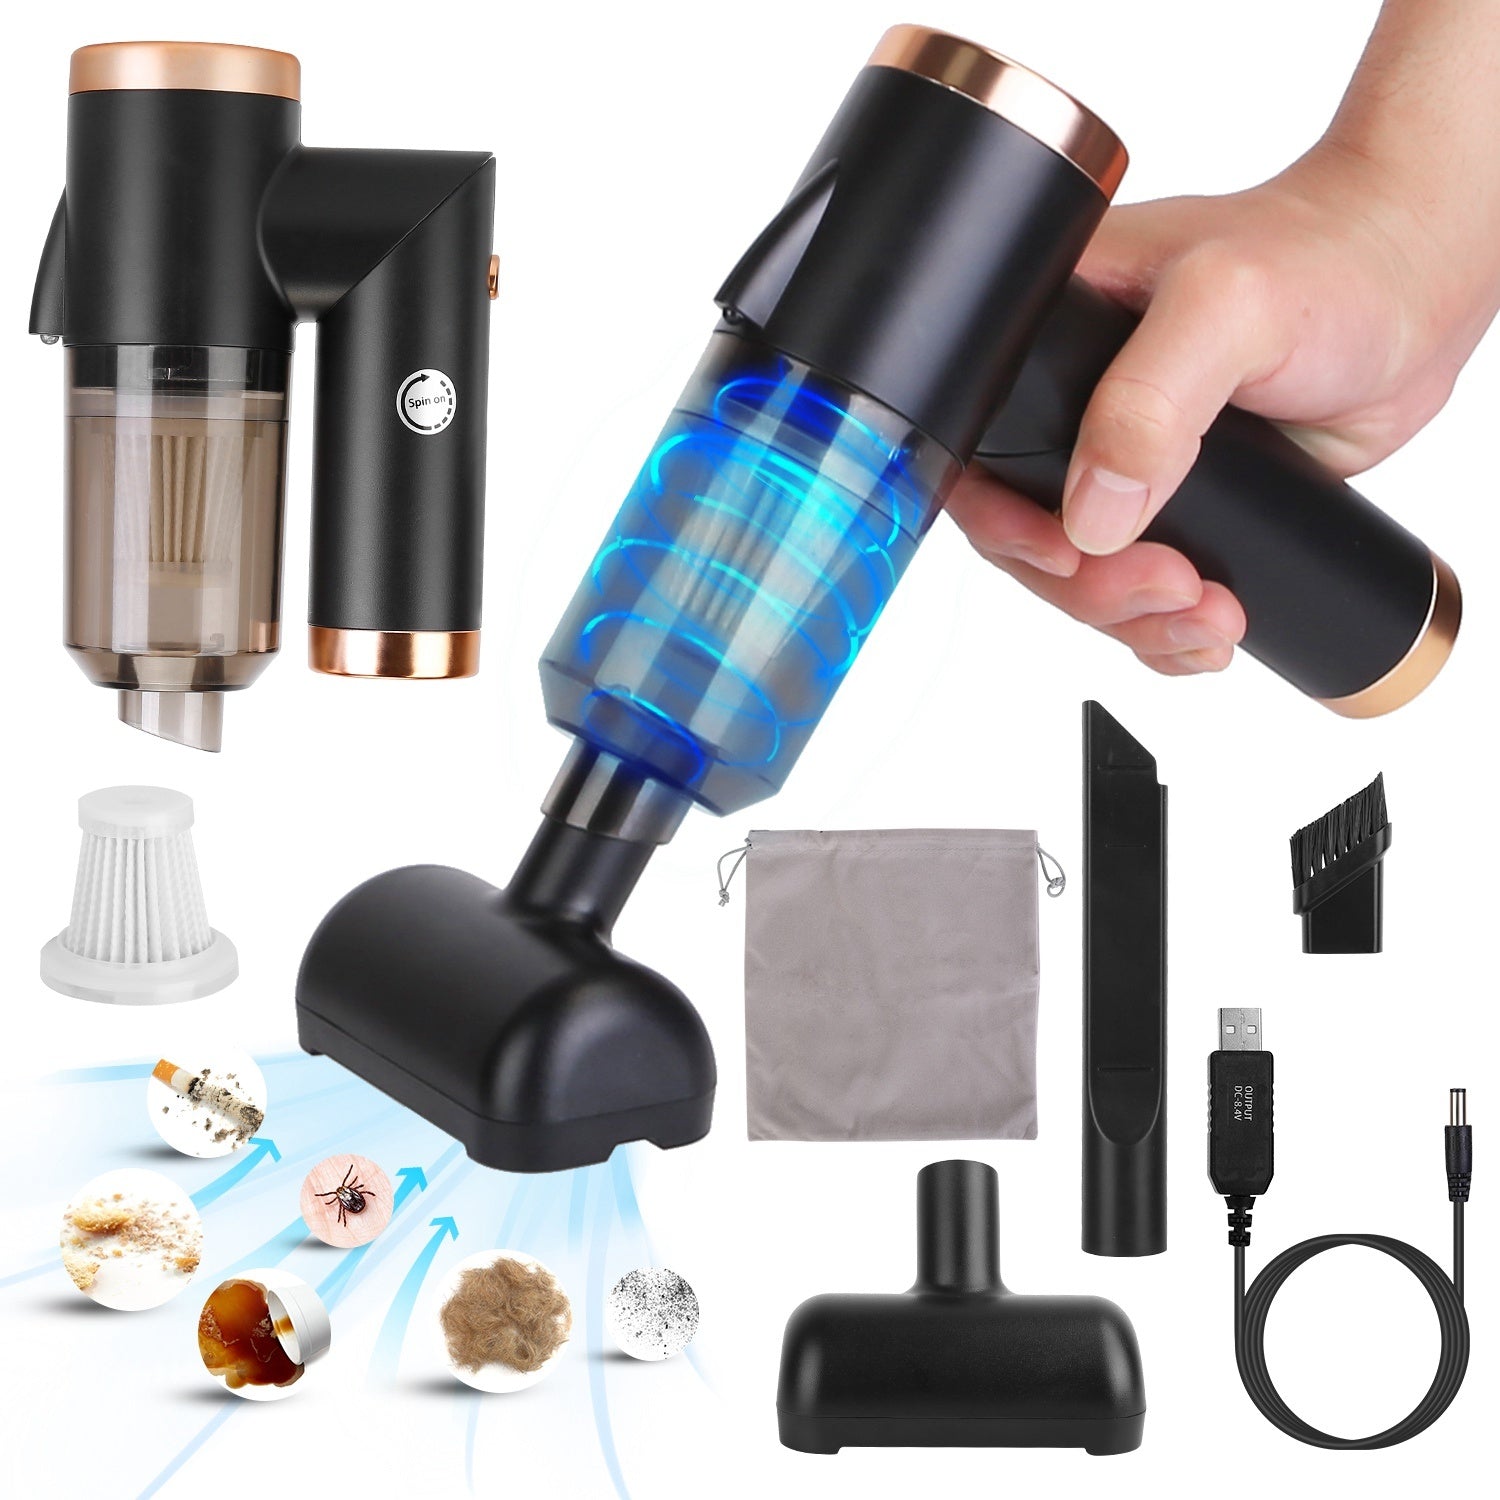 A 3 In 1 Cordless Handheld Vacuum Cleaner with Searchlight 120W 9000PA Portable Foldable Rechargeable Vacuum Car Home Duster with Brush Nozzle Long Nozzle Wide Mouth Nozzle Carry Bag, offering powerful suction and showcasing a sleek black and gold design.